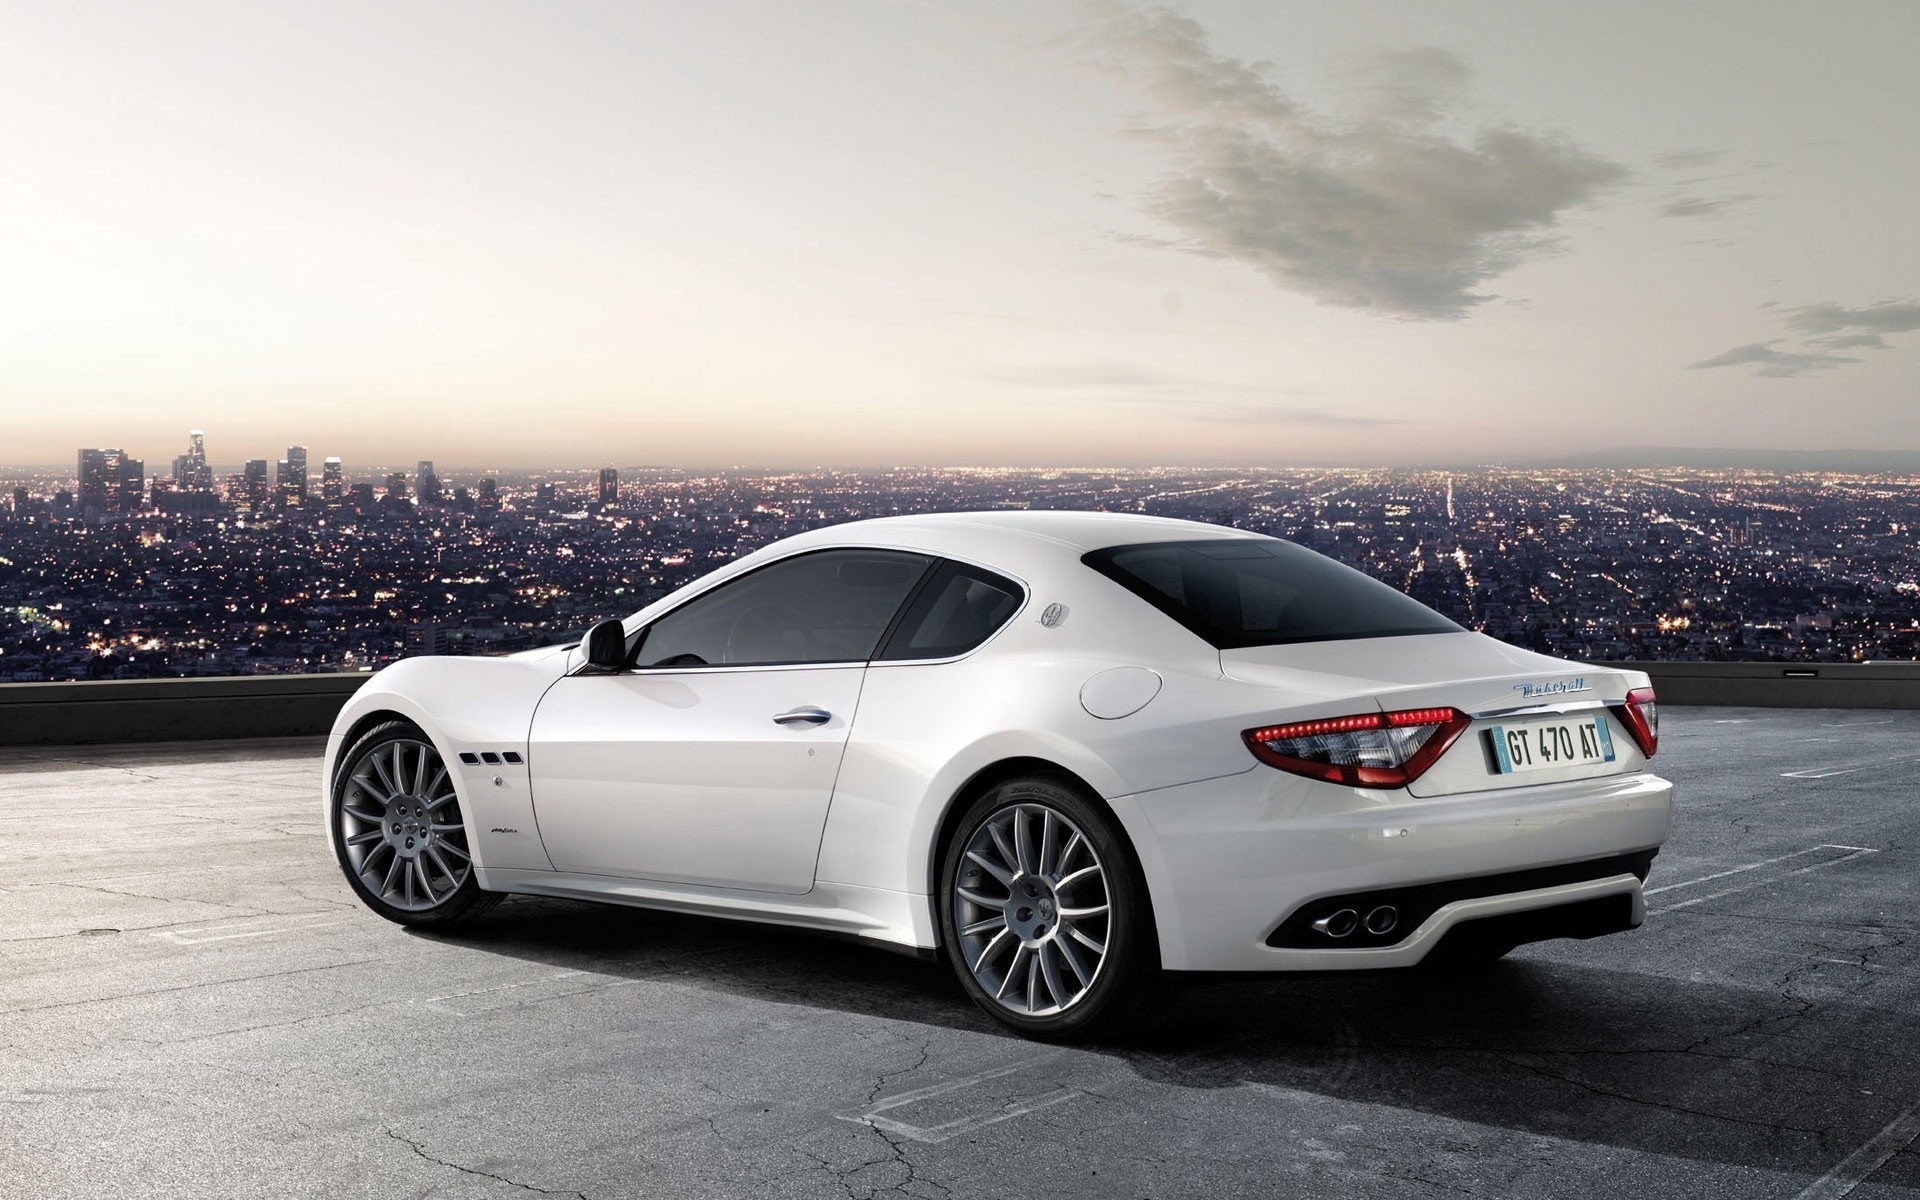 Best Car Wallpapers In High Quality, Car Backgrounds - 2009 Maserati Gt - HD Wallpaper 